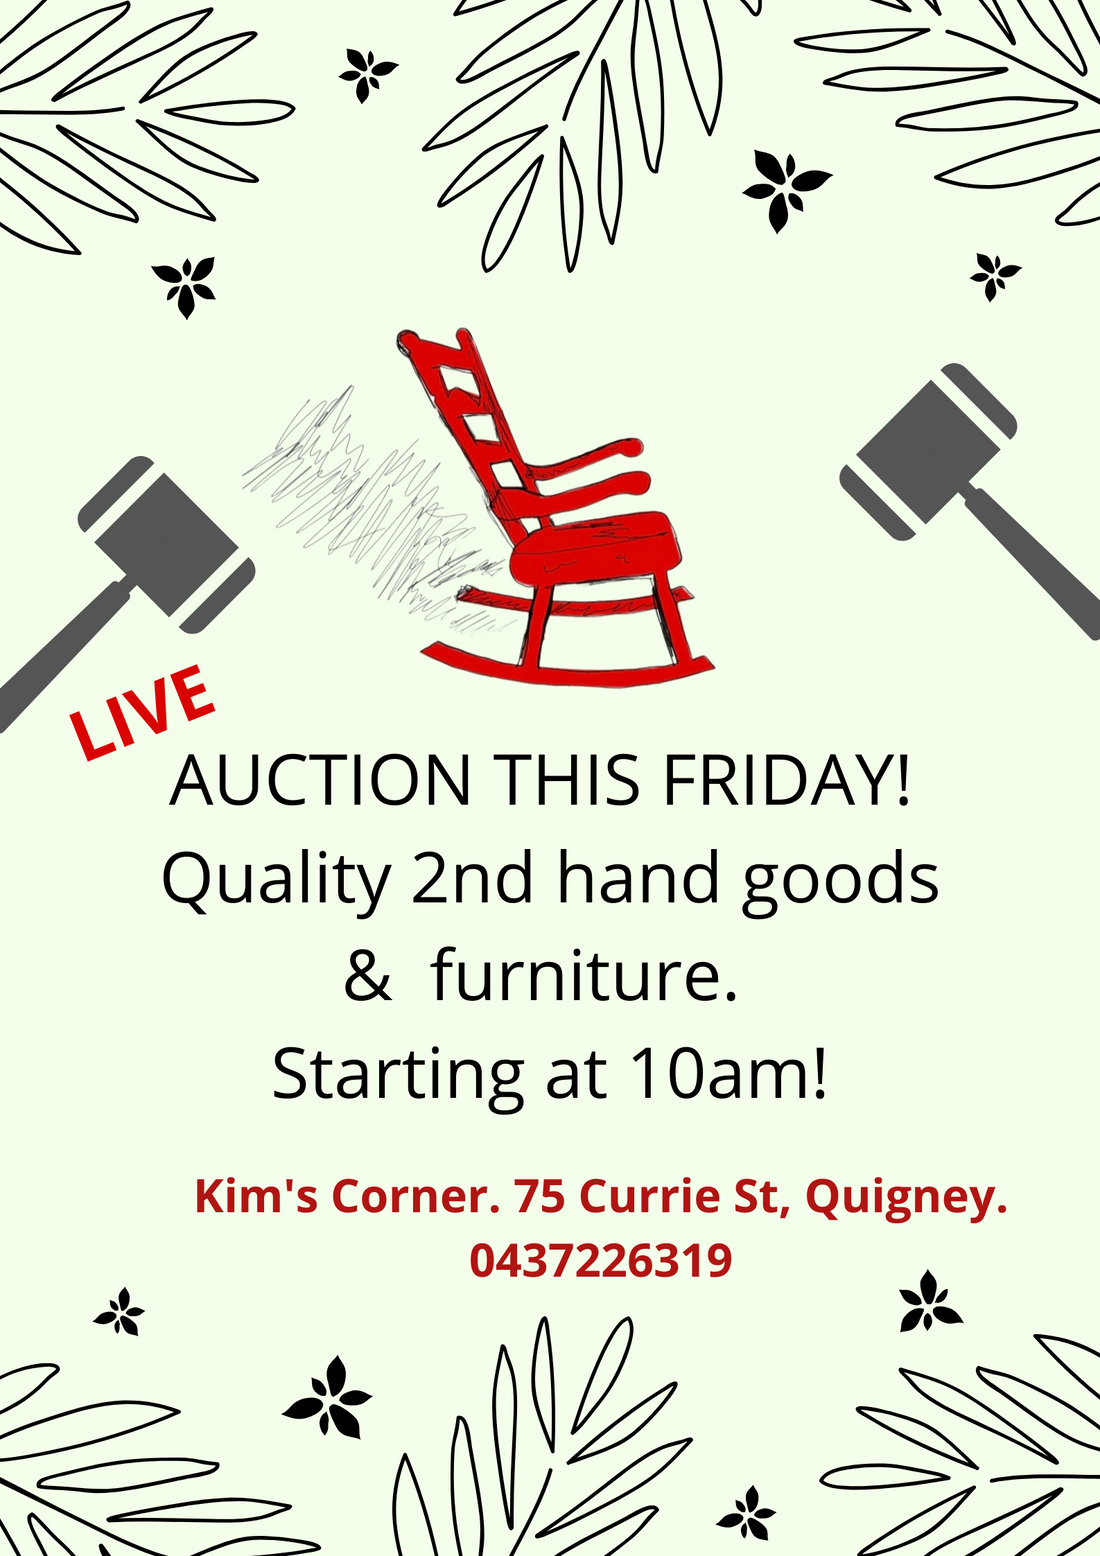 Live auction at Kim's this Friday